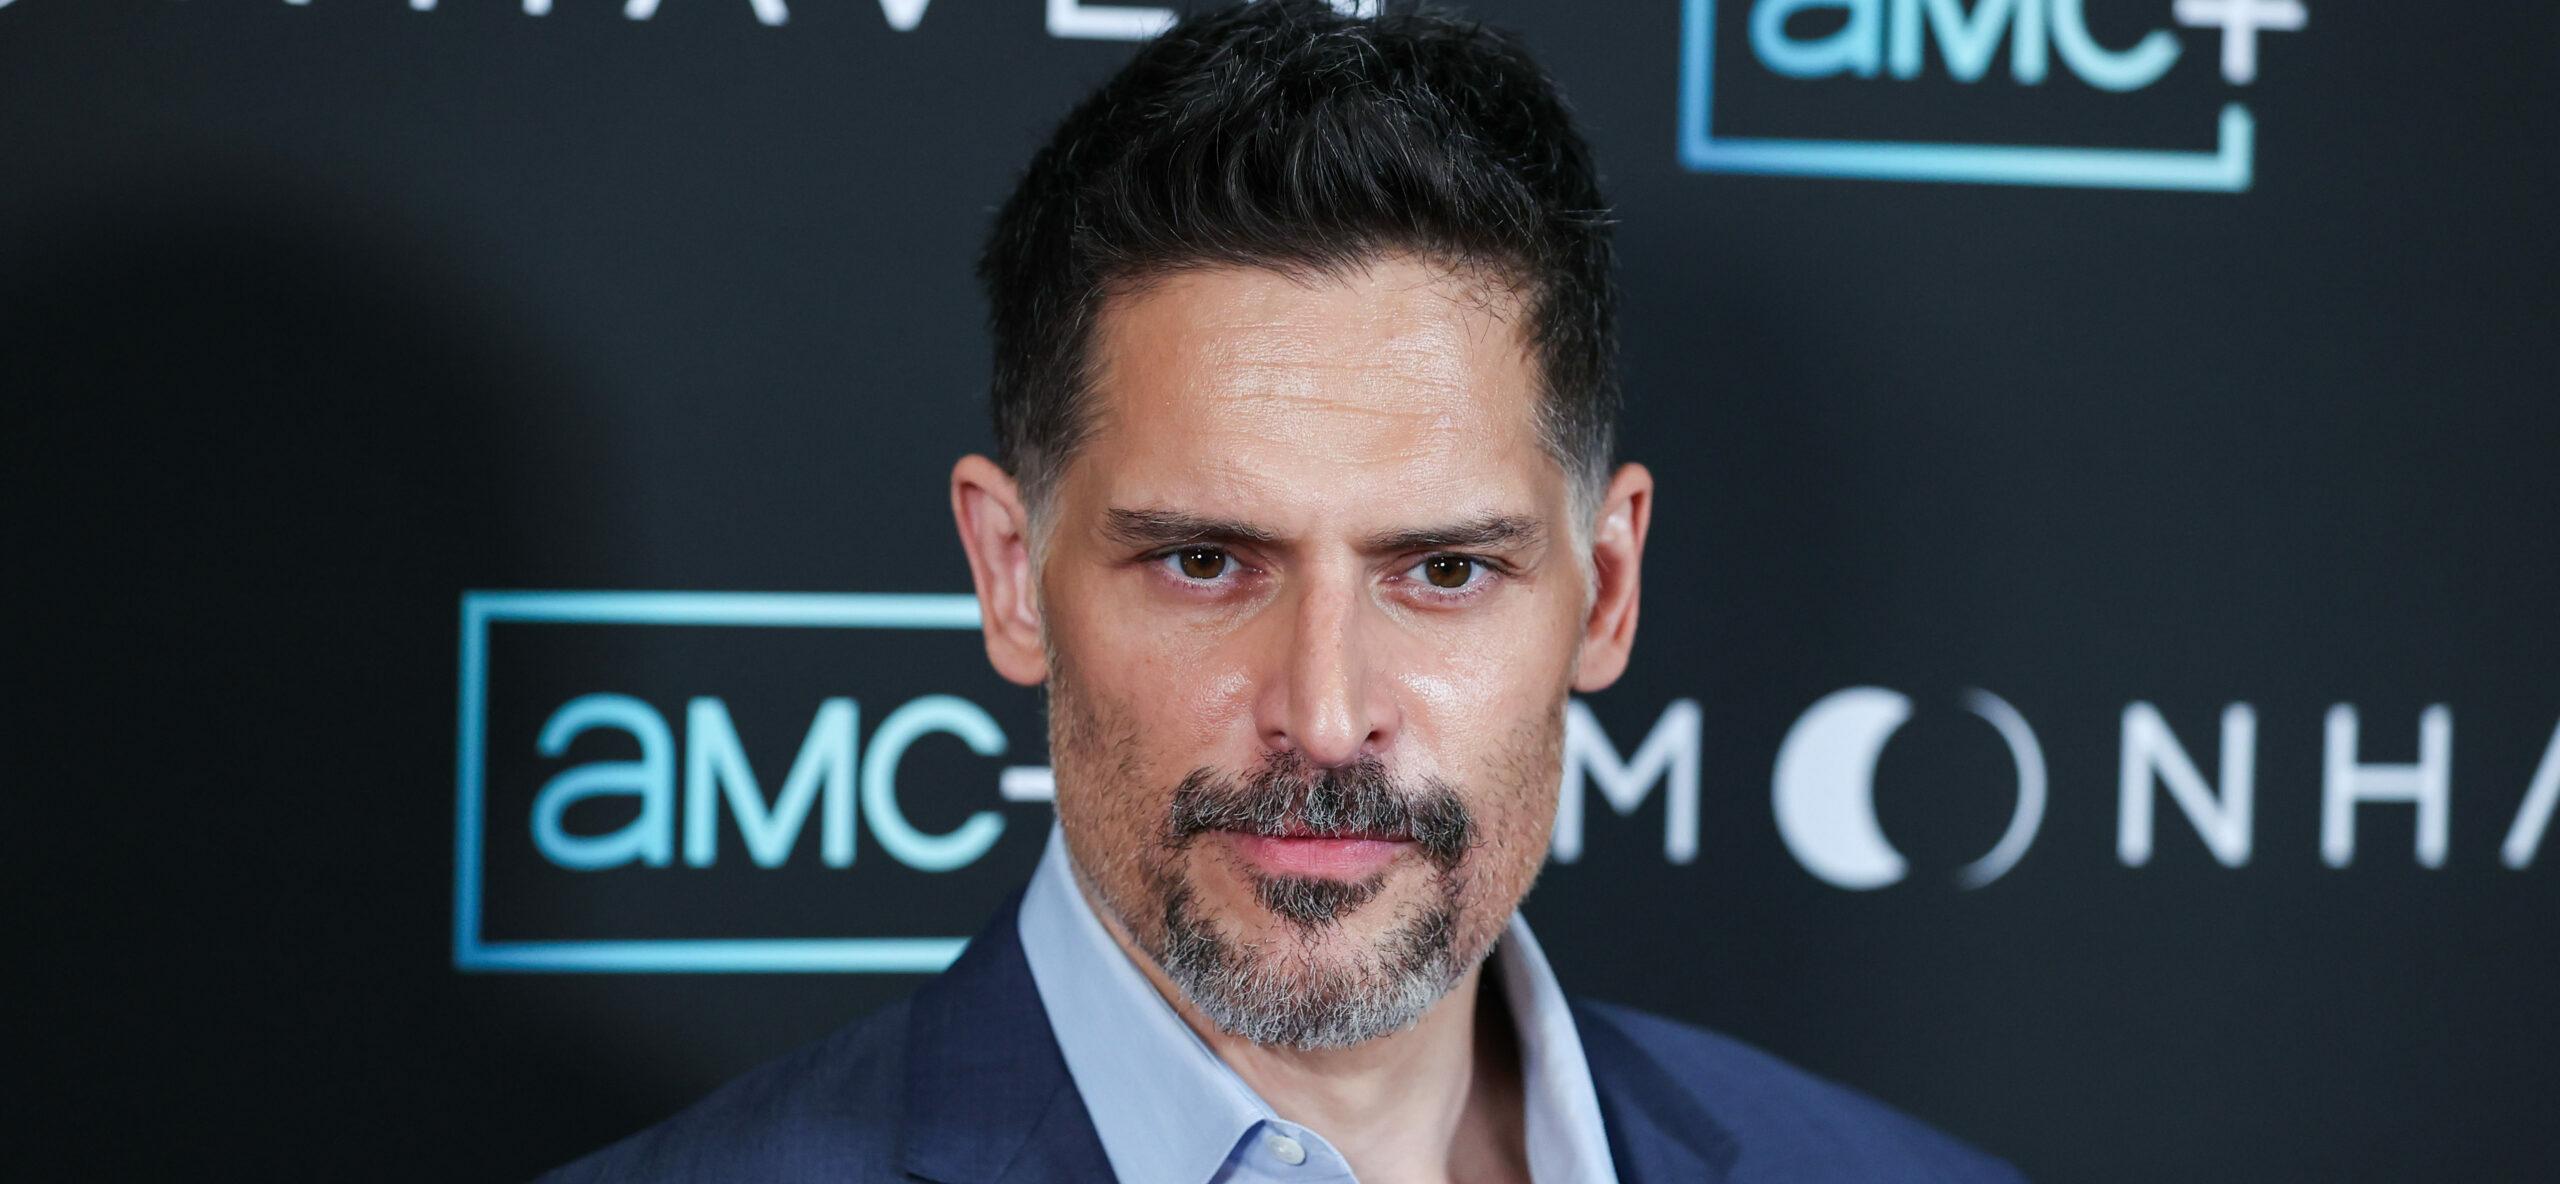 Joe Manganiello Learns He's Part-Black And Is Actually Not A Manganiello After DNA Testing